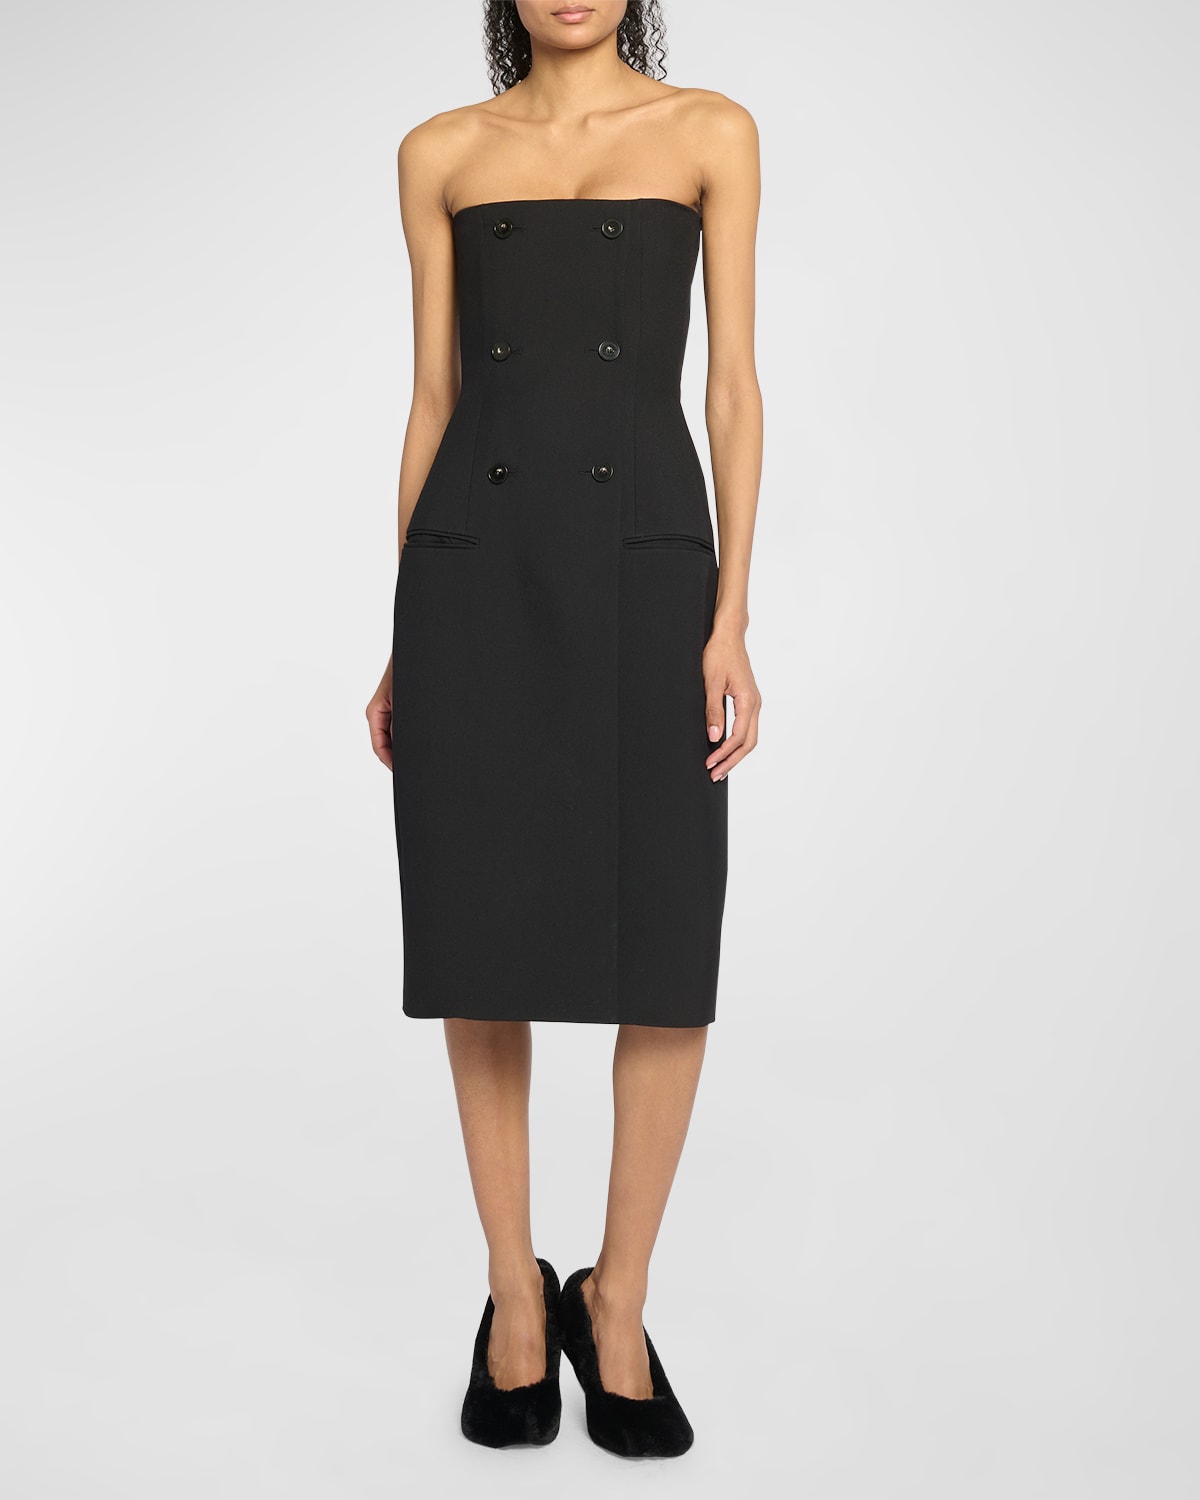 STELLA MCCARTNEY STRAPLESS MOLDED BUSTIER DOUBLE-BREASTED MIDI DRESS